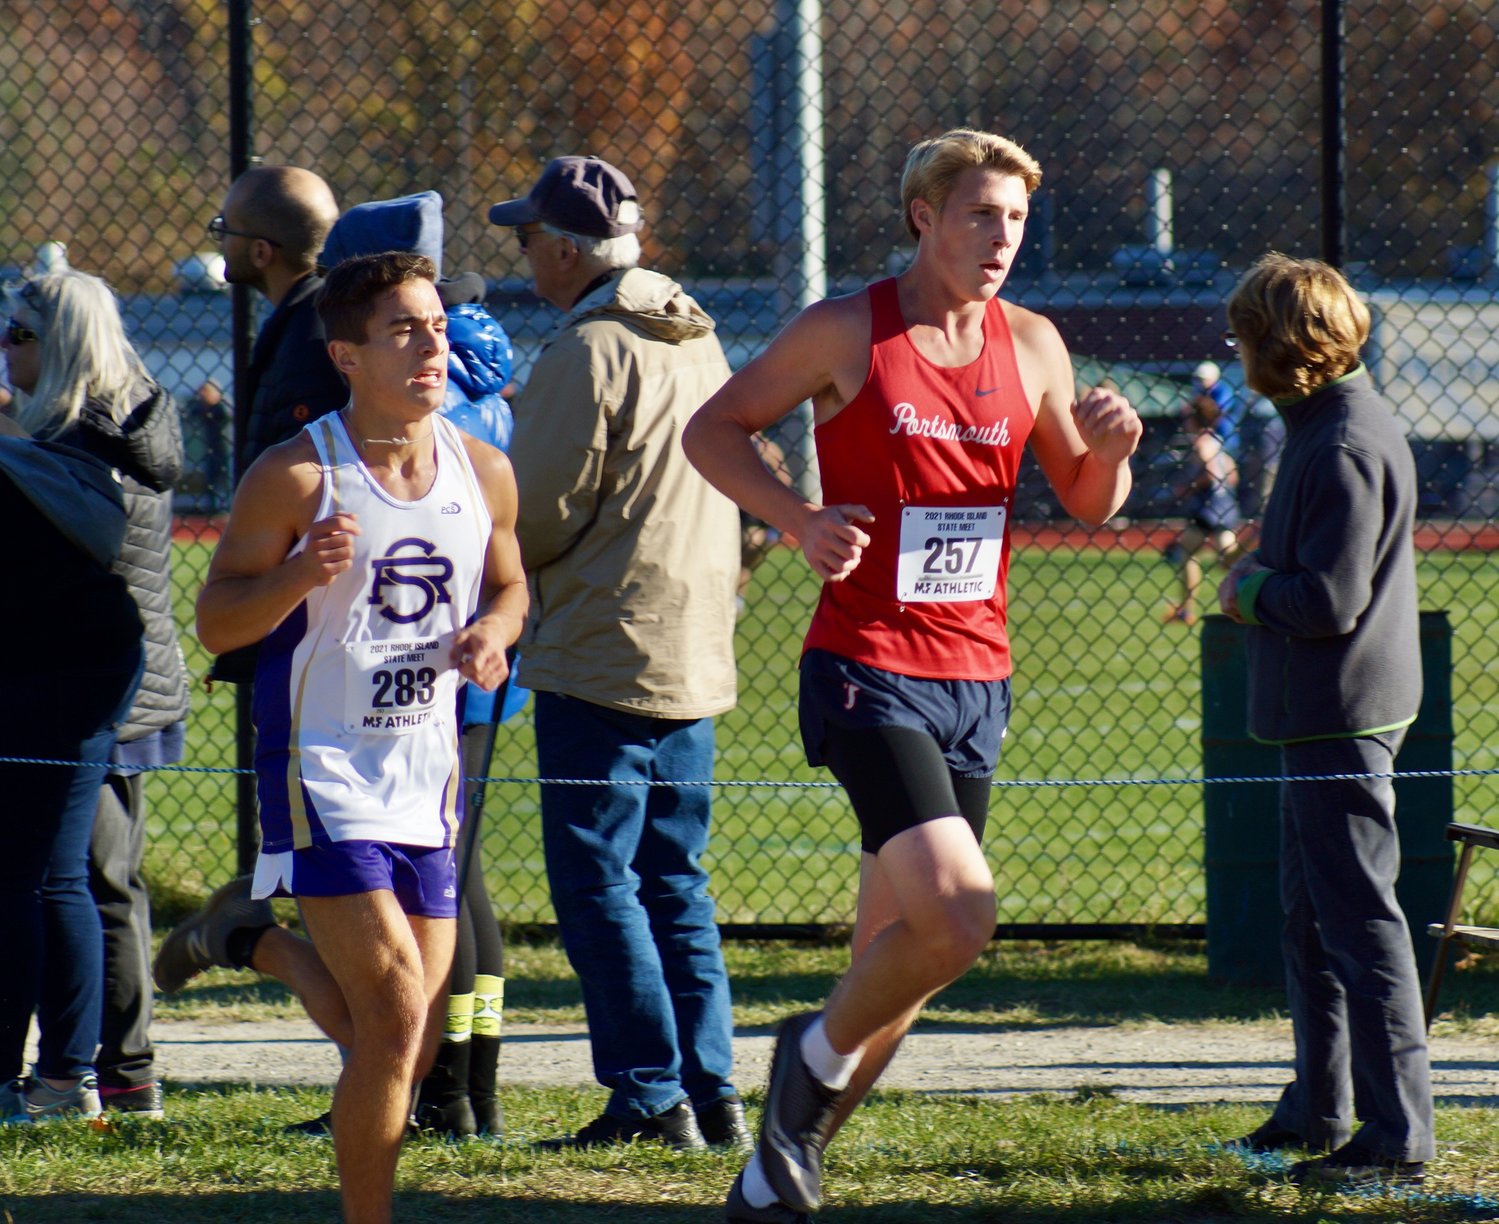 Portsmouth High’s Jeff Brady improved his personal best by nearly 30 seconds as he ran the 5K course in a time of 16:53.